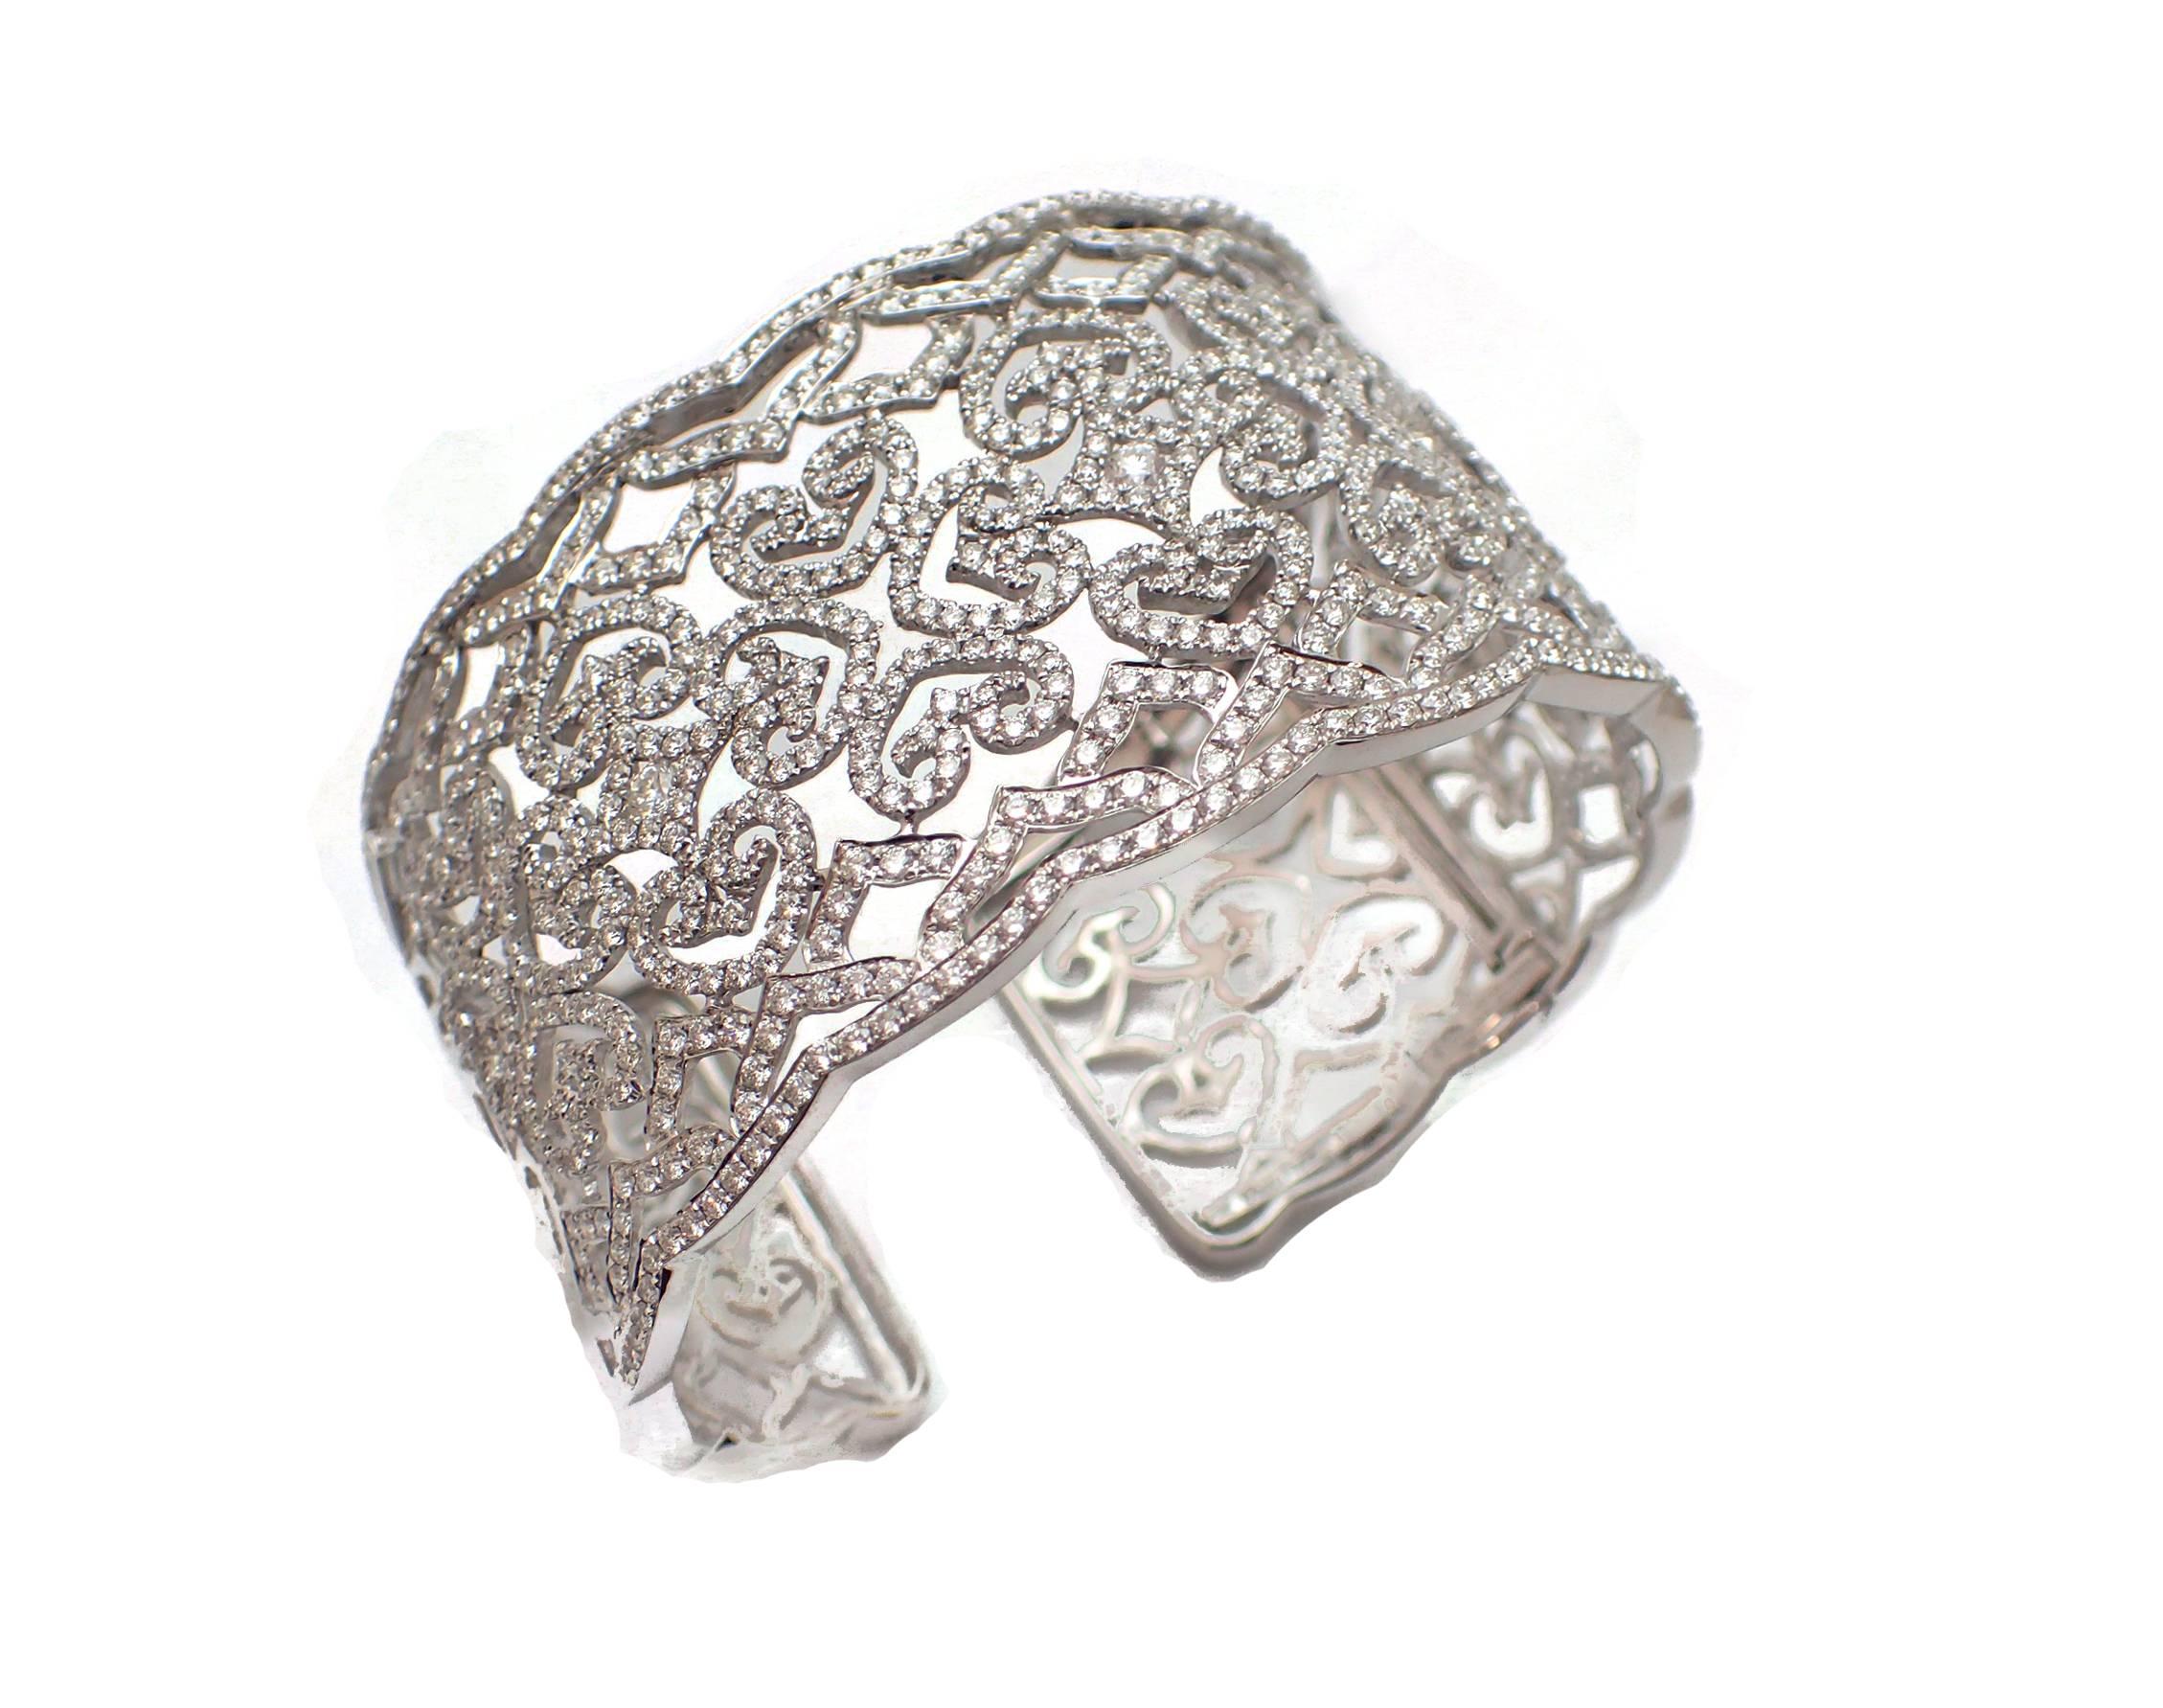 Magnificent diamond cuff bracelet in 18k white gold.  This 1.5